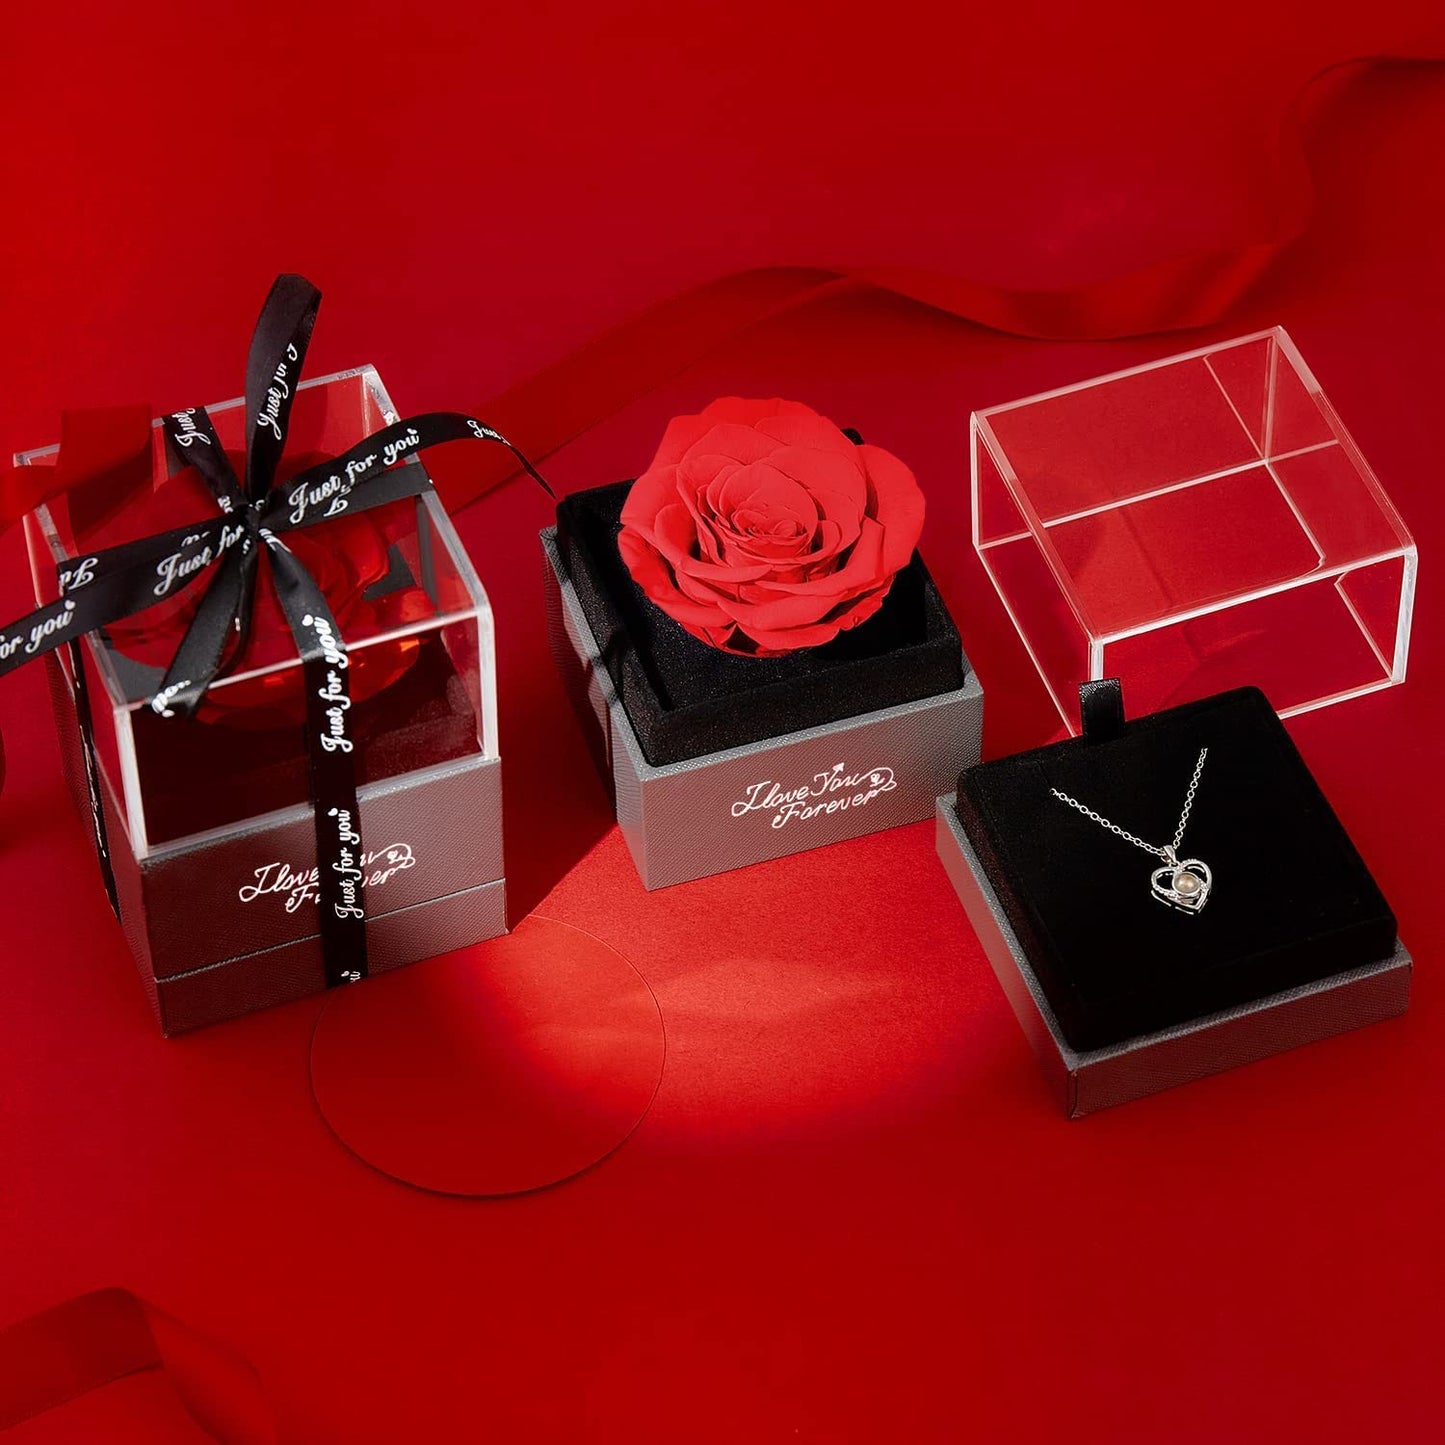 Red Rose with I Love You Necklace 